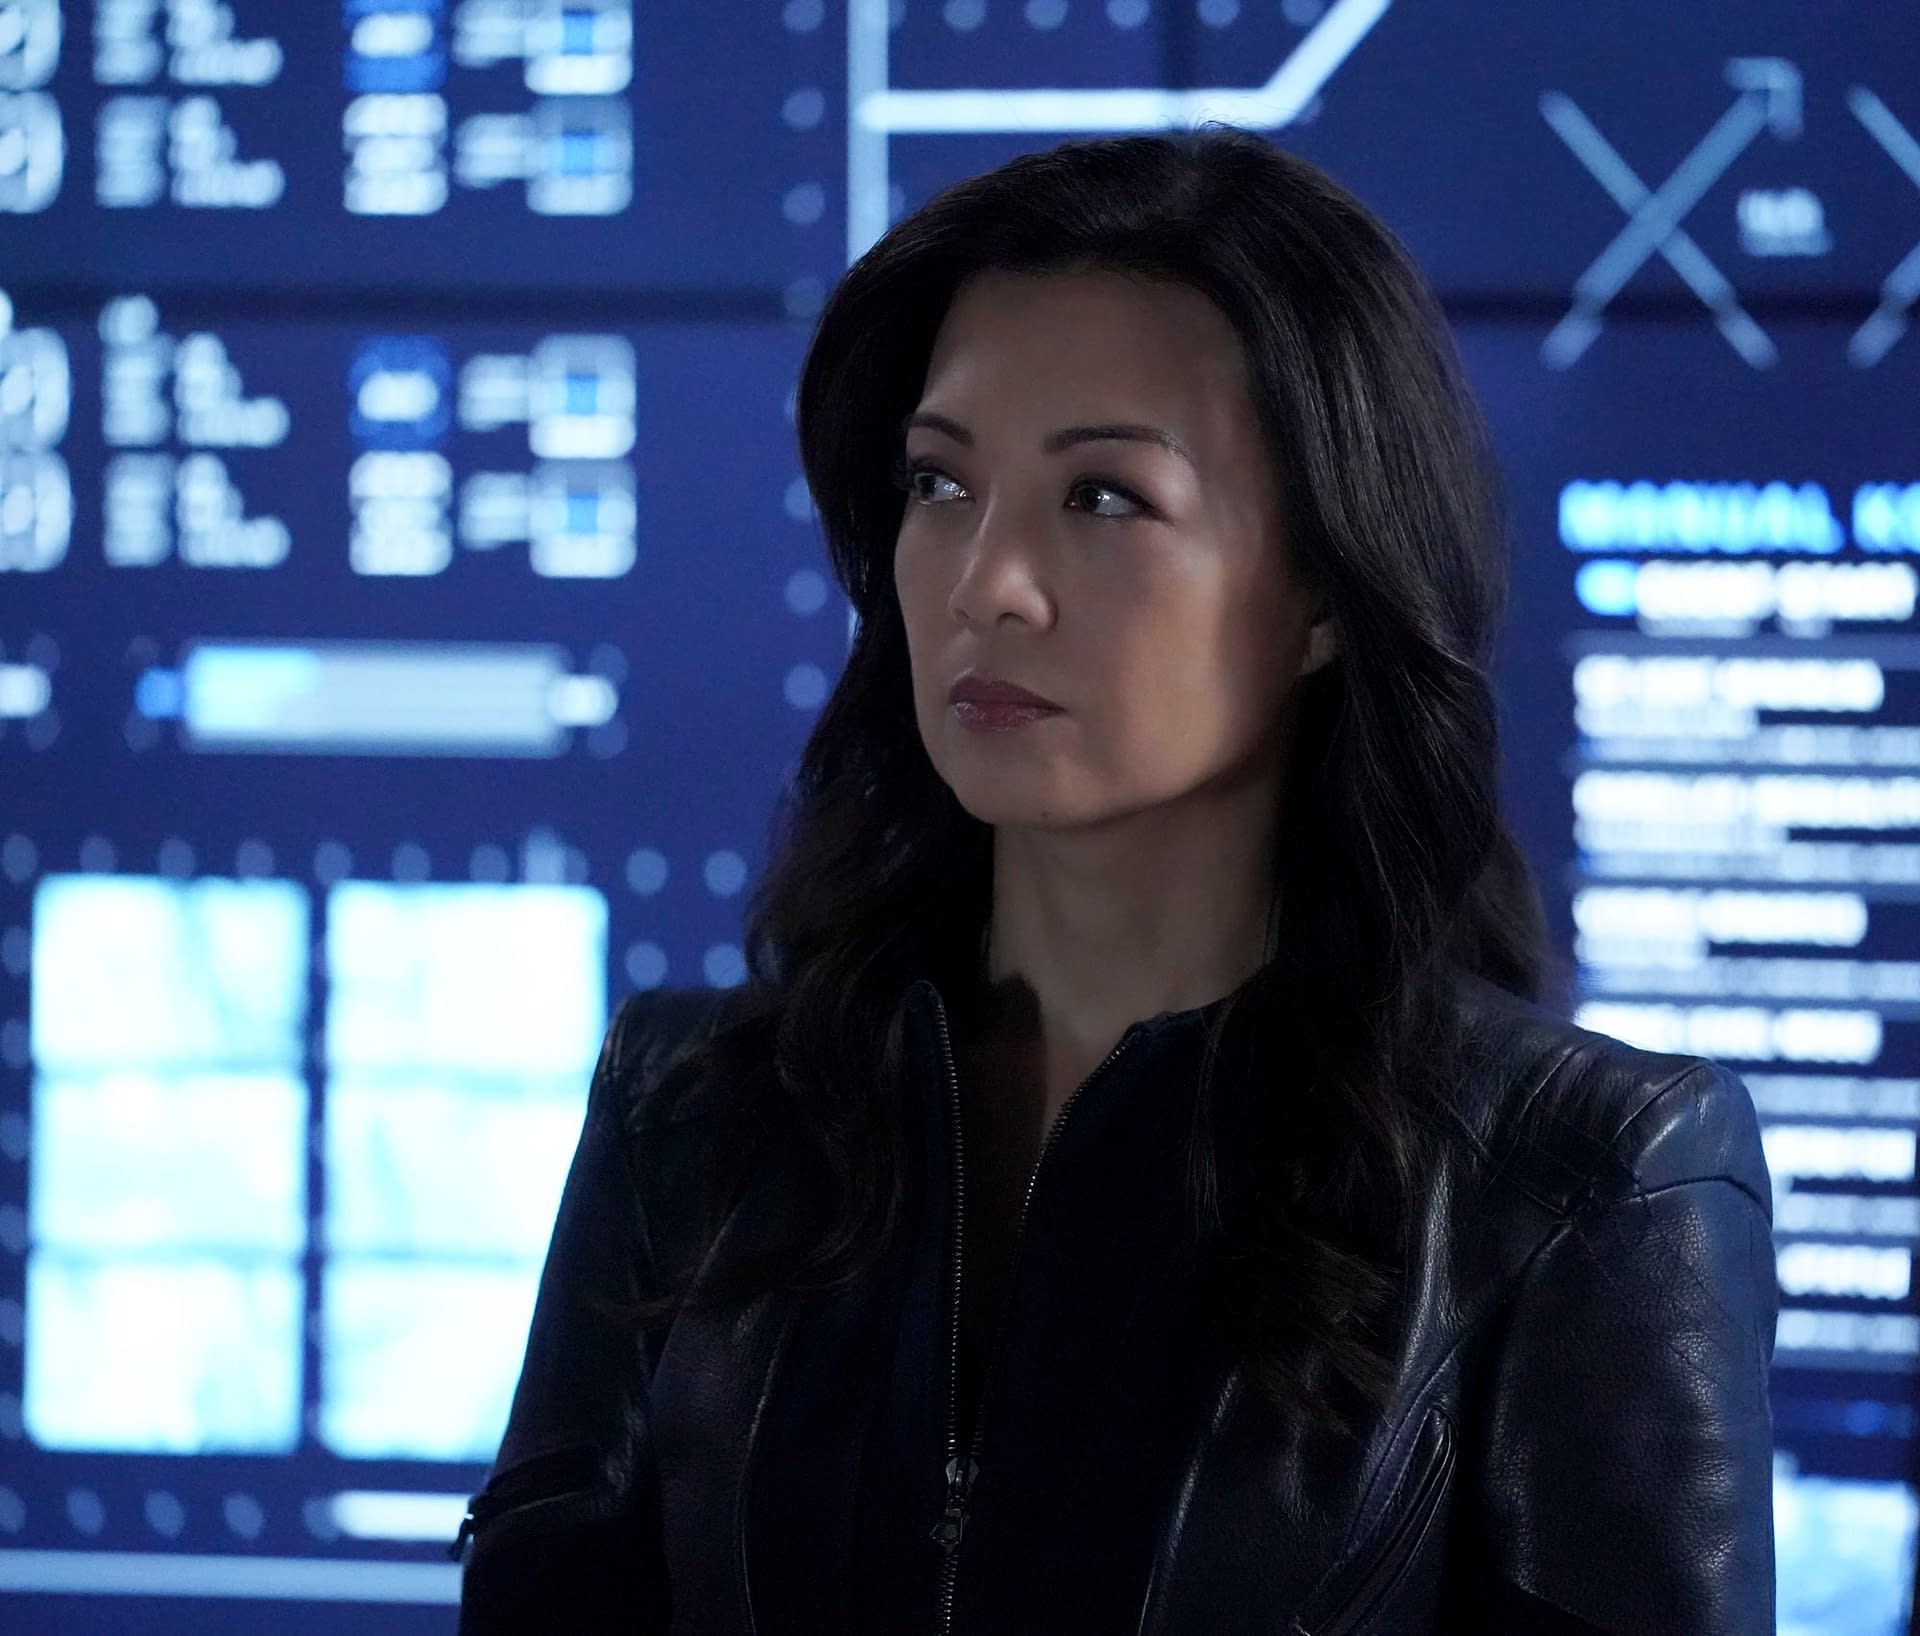 "Marvel's Agents of S.H.I.E.L.D." Season 6, Episode 7 &#8211; In "Toldja," The Agents Get Schooled In Their Own House [SPOILER REVIEW]